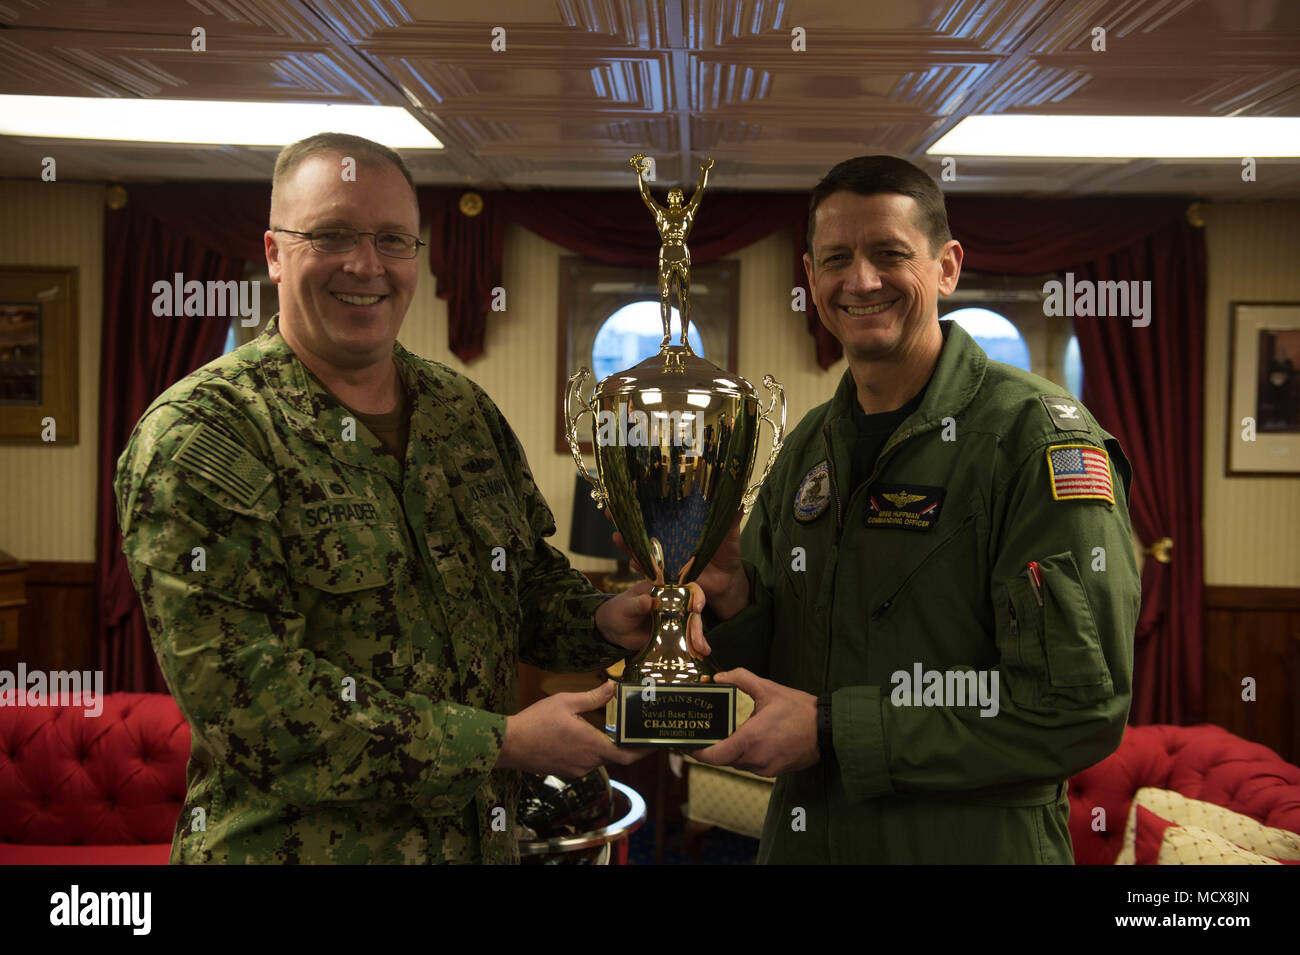 180302-N-QE928-010 BREMERTON, Wash. (March 2, 2018) Capt. Edward Alan Schrader, commanding officer of Naval Base Kitsap presents the Naval Base Kitsap Captain’s Cup trophy to Capt. Greg Huffman, commanding officer of USS John C. Stennis (CVN 74), aboard the ship. The Captain’s Cup is an element of the Navy’s intramural sports program and is presented to the team with the most points at the end of the calendar year.  John C. Stennis is in port conducting training as it continues preparing for its next scheduled deployment. (U.S. Navy photo by Mass Communication Specialist Seaman Erika Kugler/Re Stock Photo